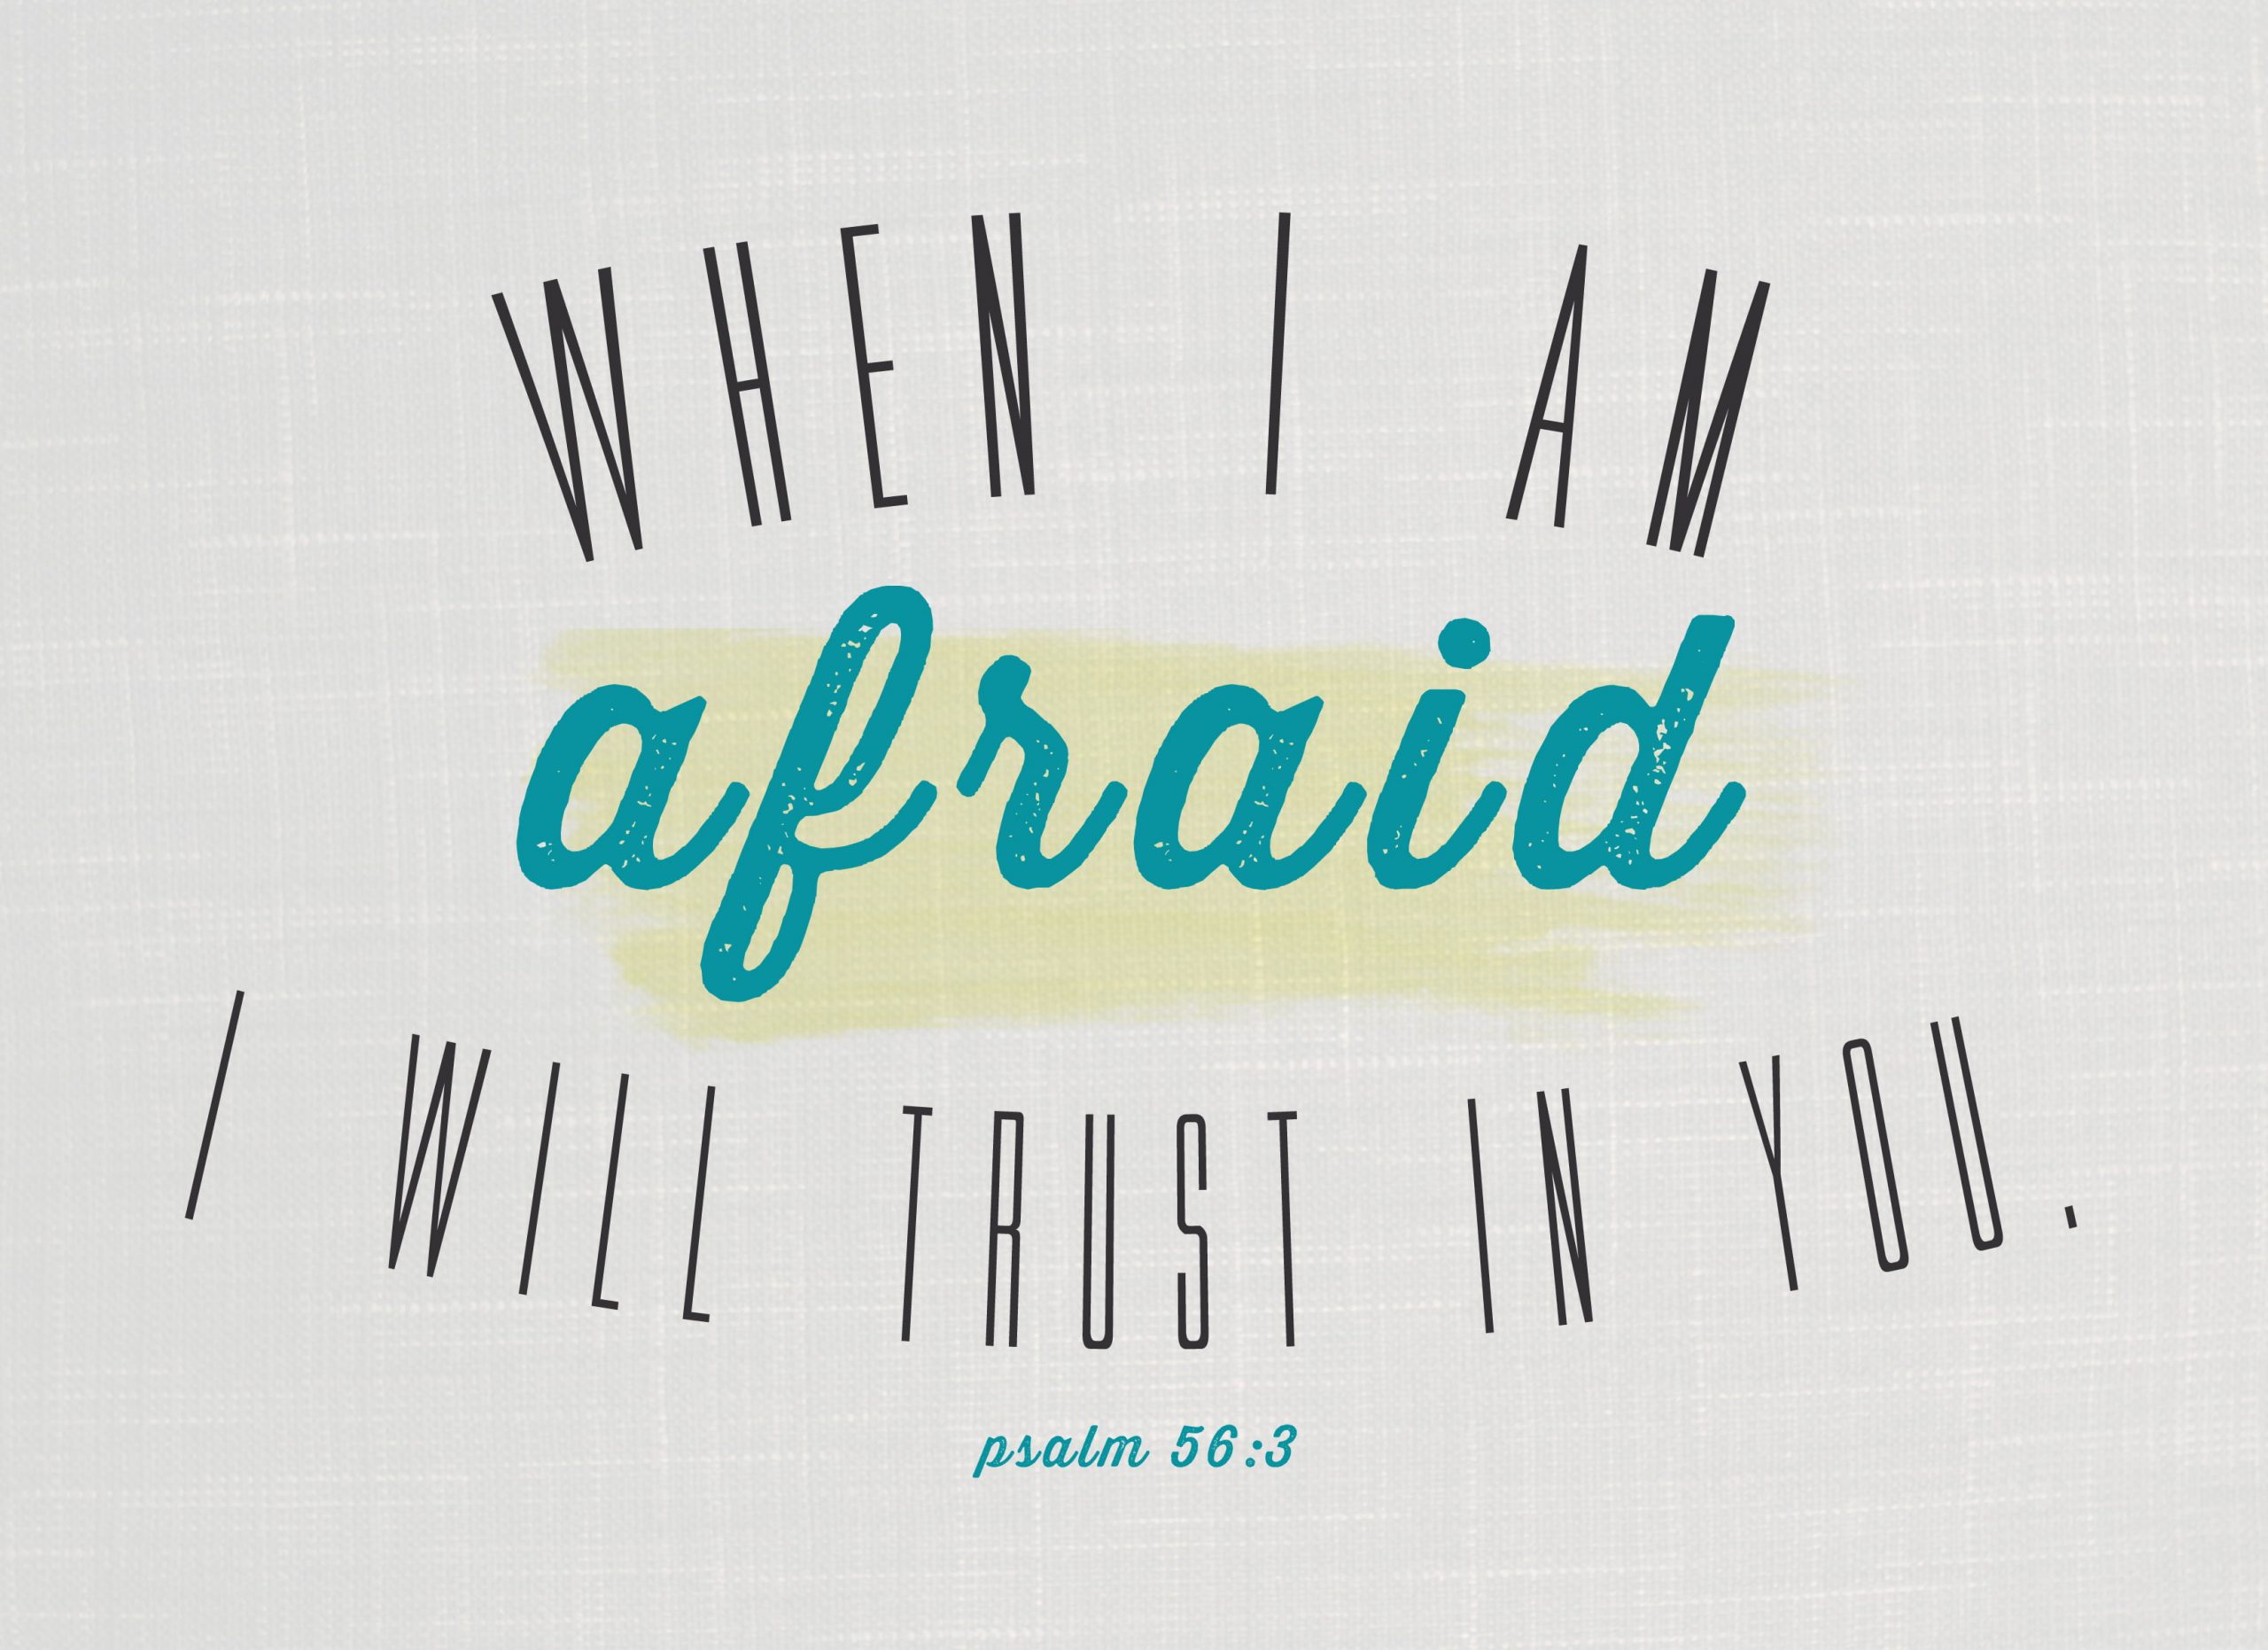 When i am afraid i will trust in you wallpaper, Bible, motivational, quote, religion